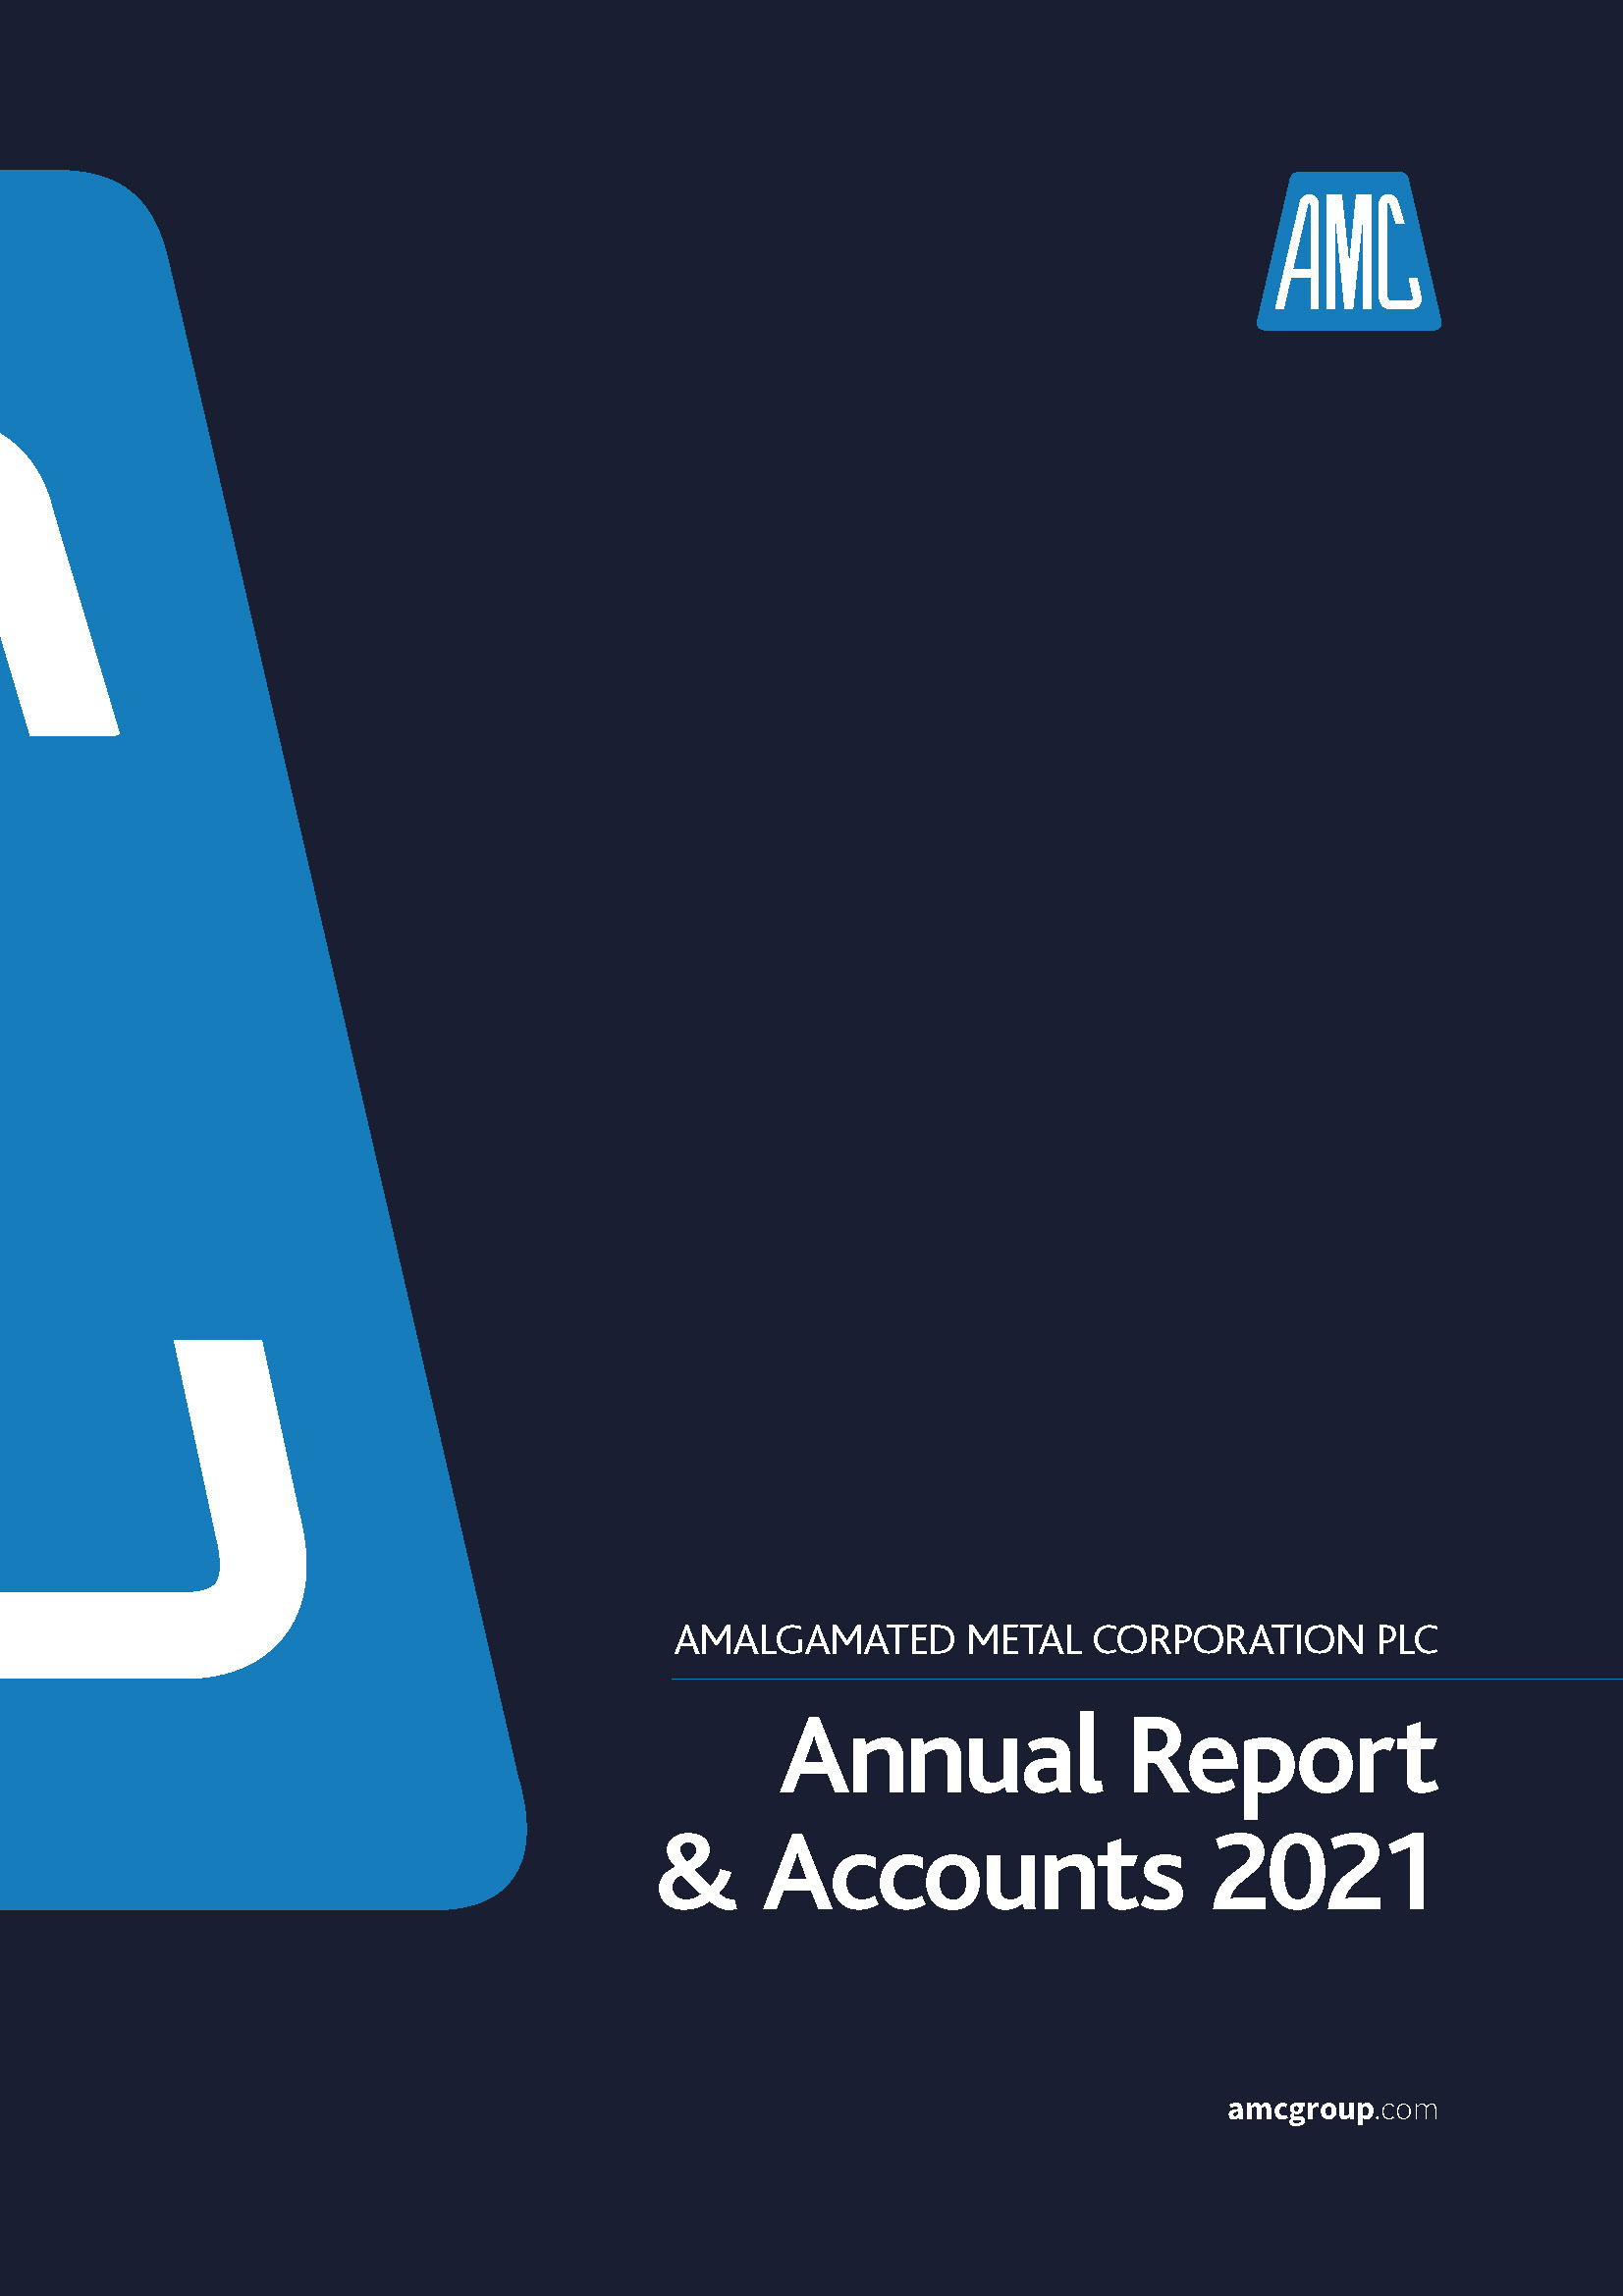 AMC Group Annual Report 2021